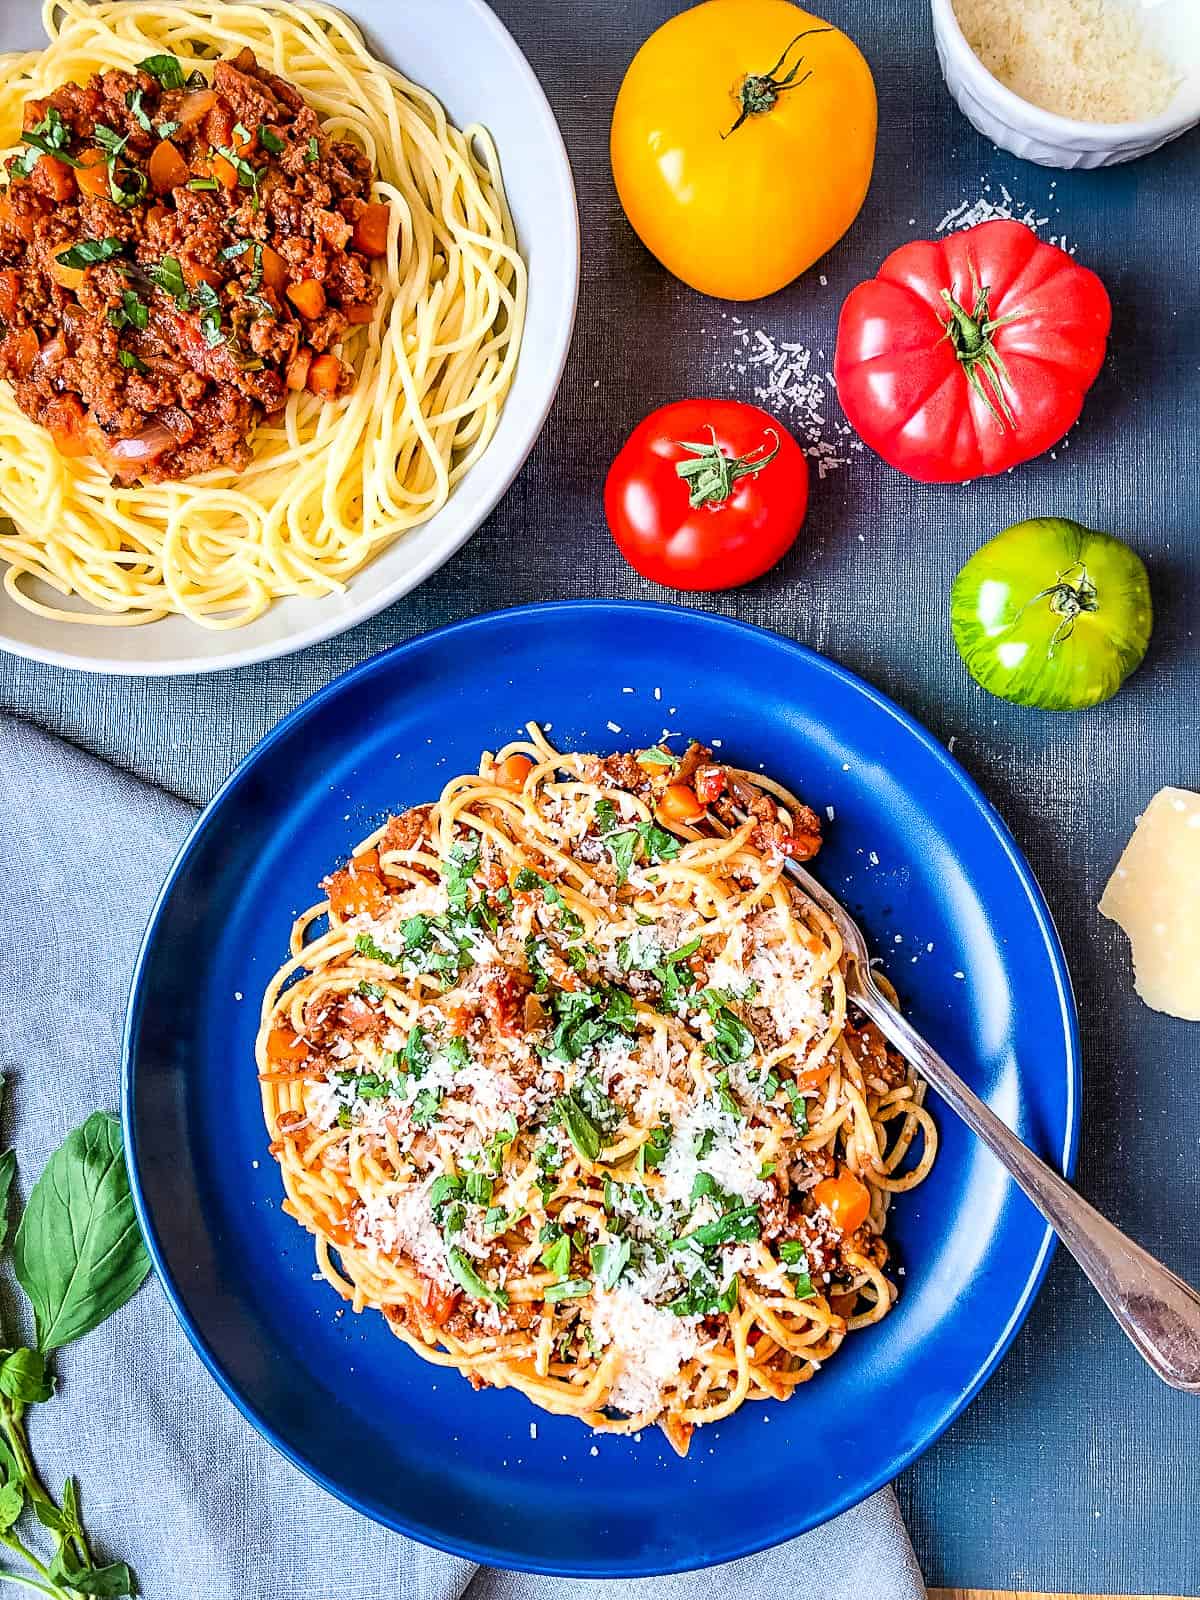 quorn vegetarian bolognese sauce mixed with spaghetti in a bowl topped with parmesan cheese